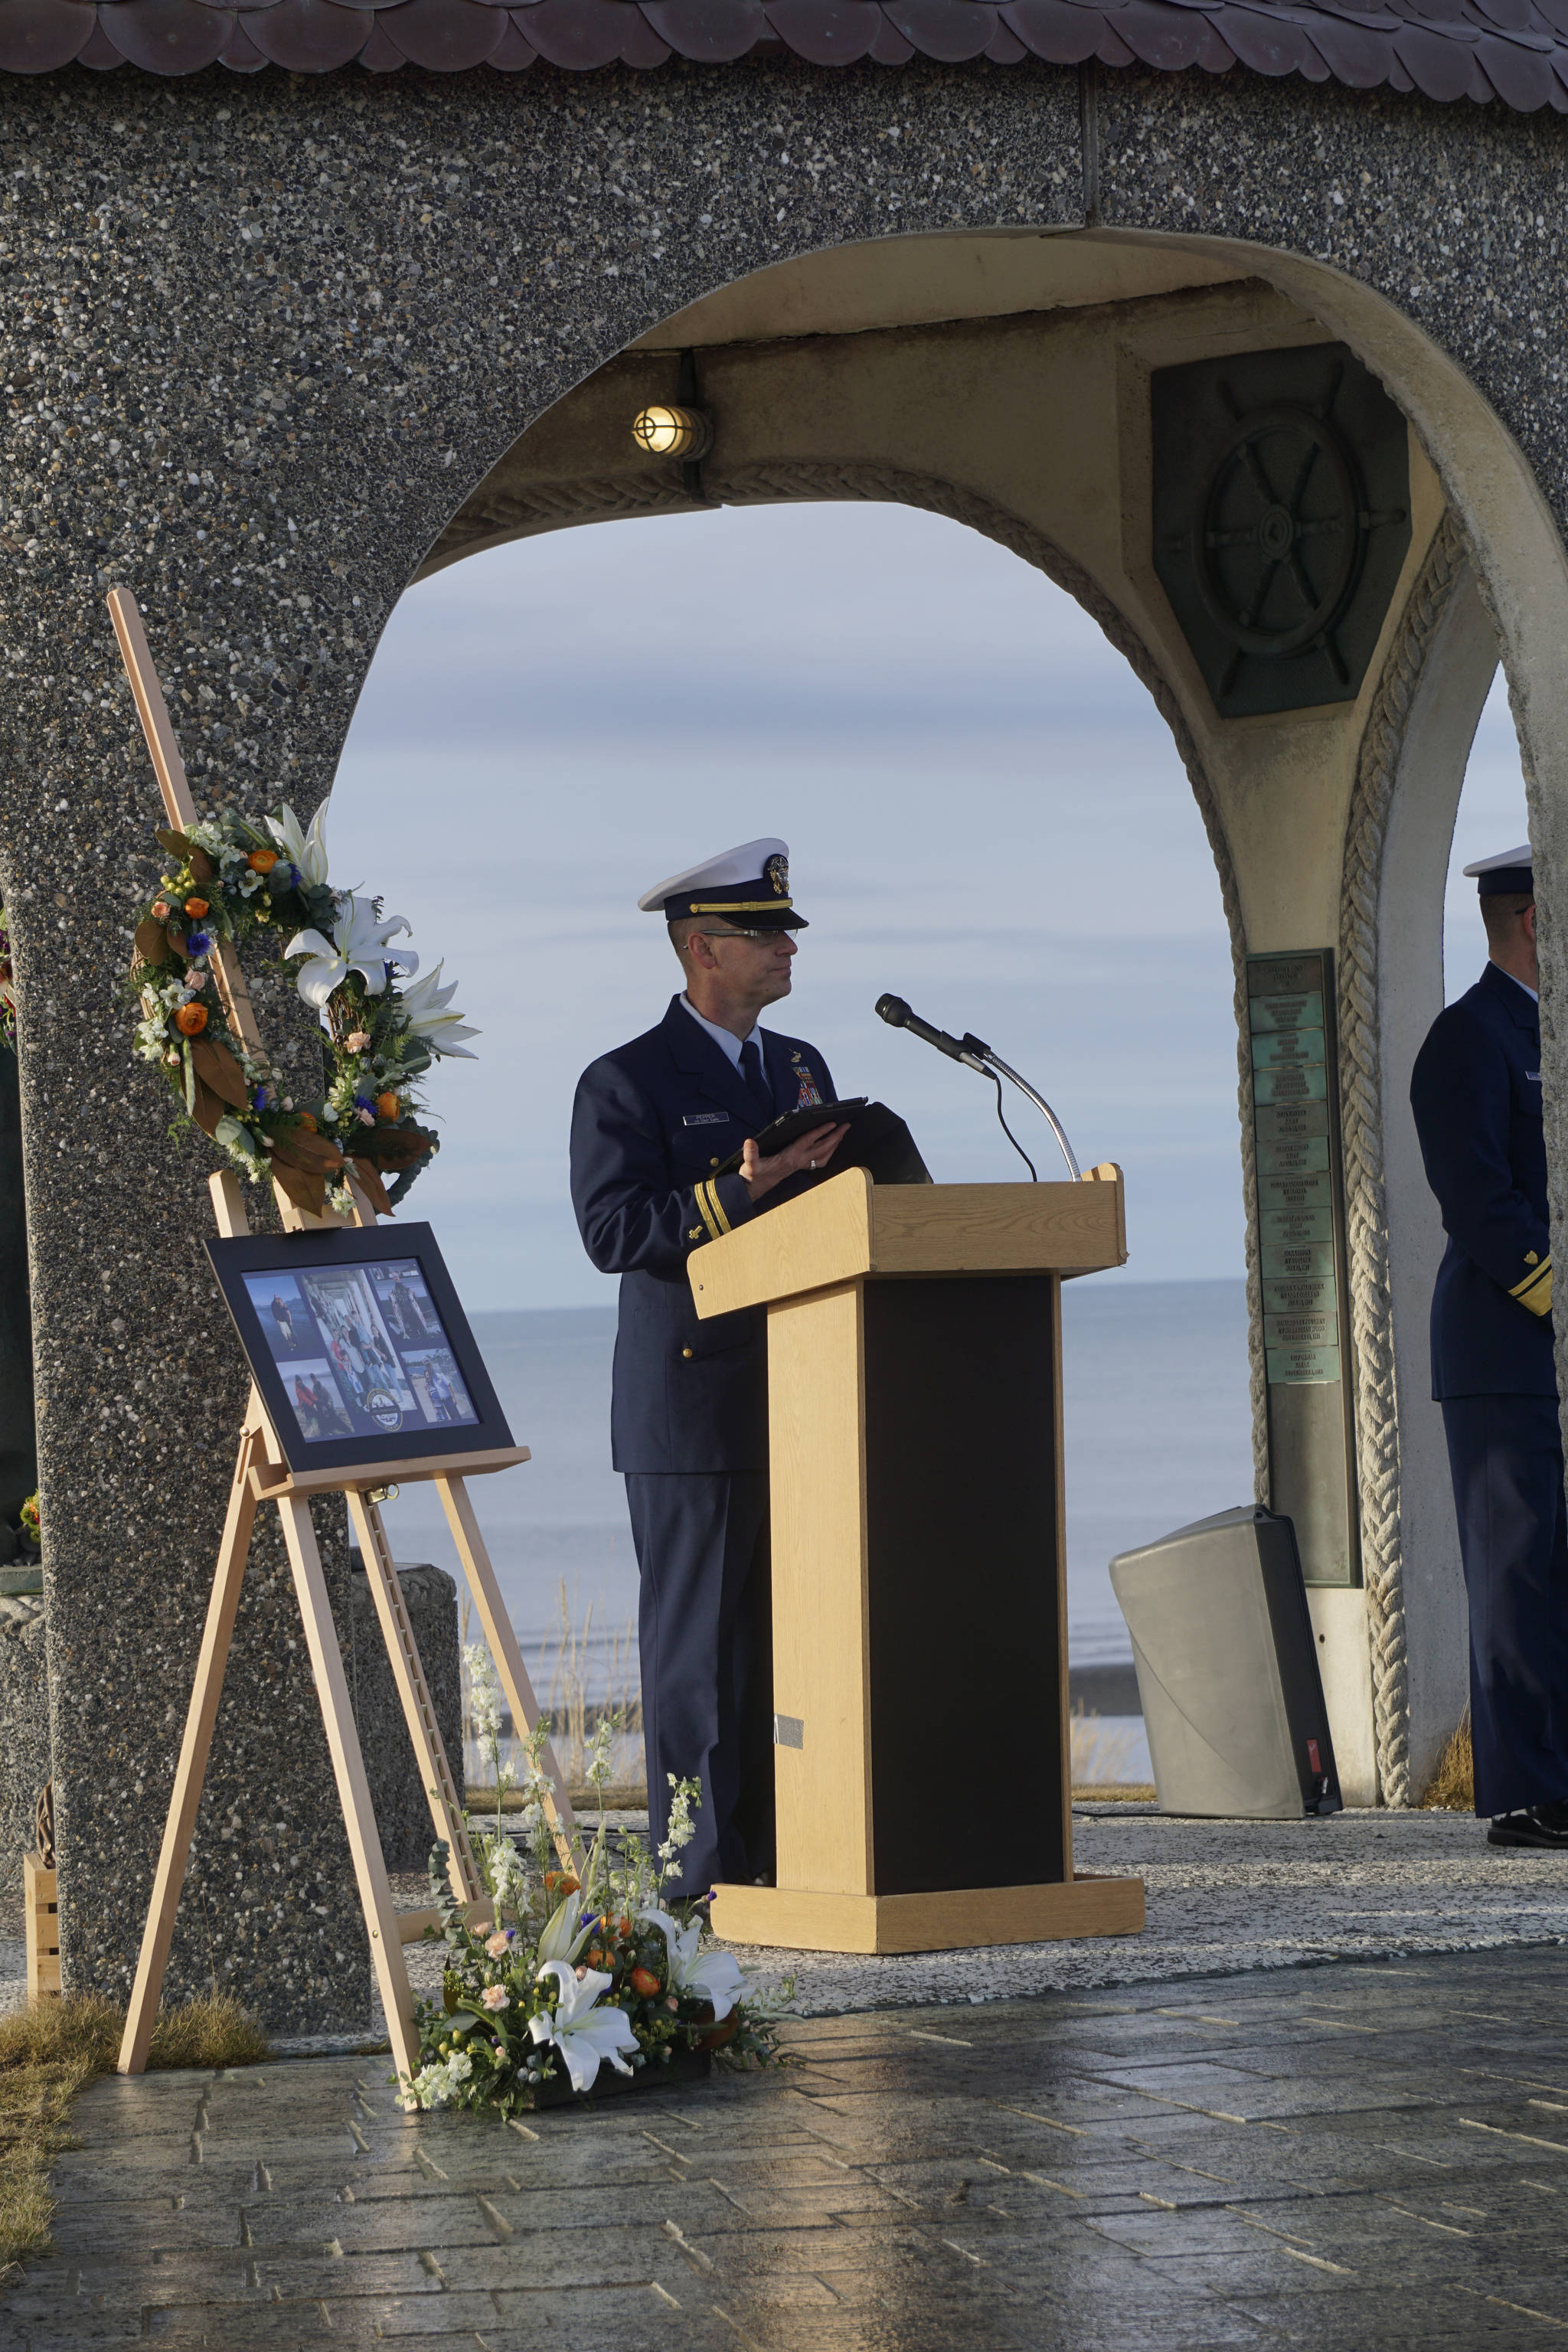 Chaplain Gary Pepper speaks at a memorial service for Chief Warrant Officer Michael Kozloski on Friday morning, Feb. 8, 2019, at the Seafarer’s Memorial on the Homer Spit, Homer, Alaska. (Photo by Michael Armstrong/Homer News)